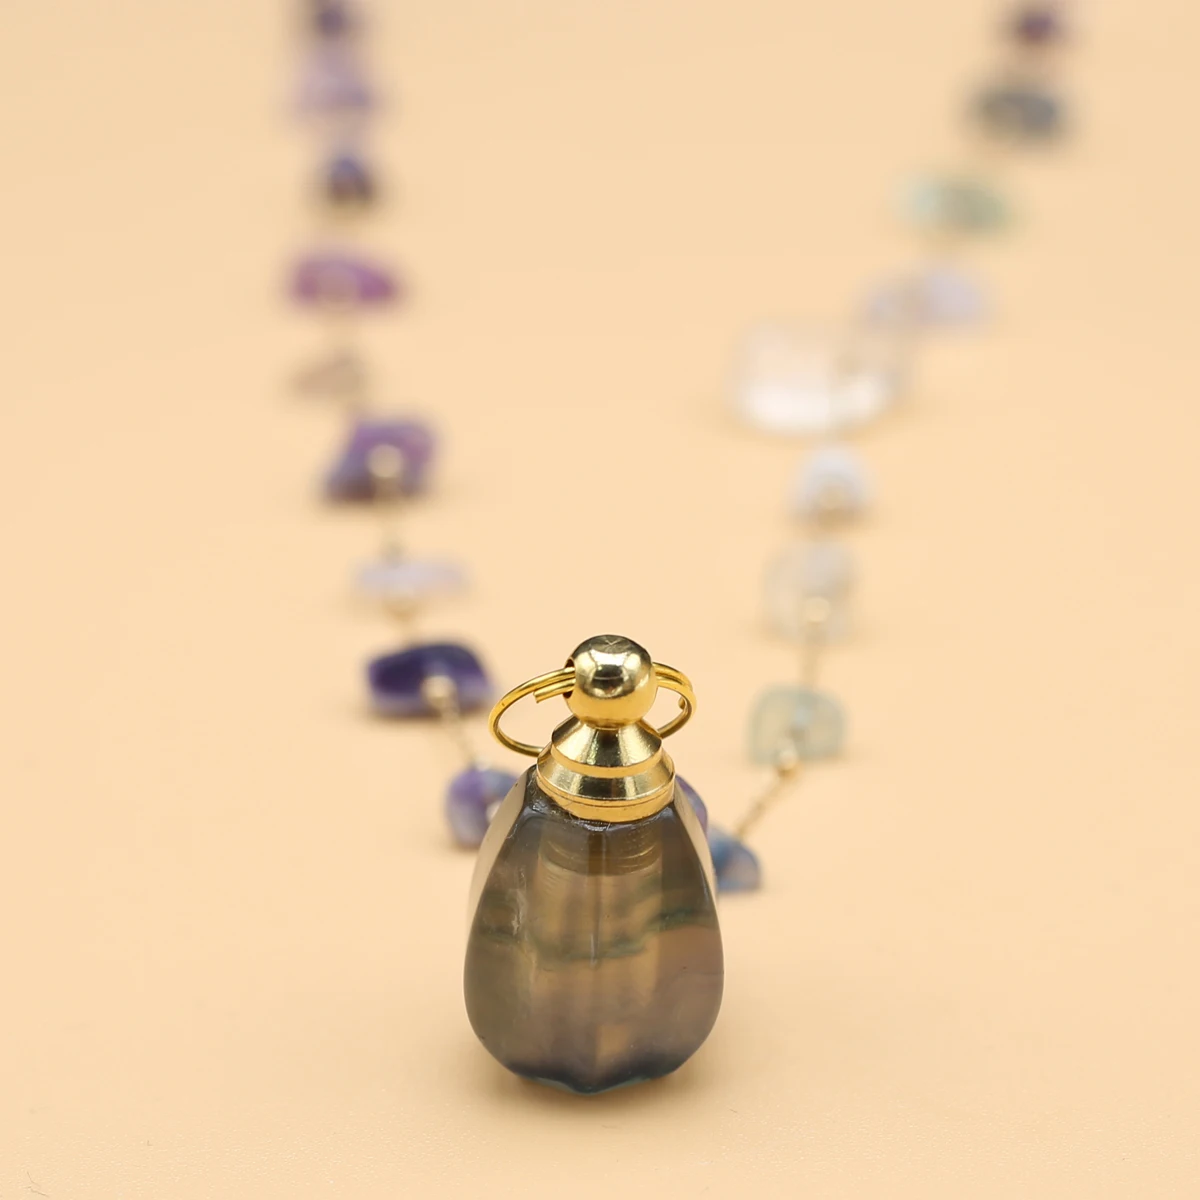 

Natural Stones Perfume Bottle Pendant Necklace Fluorite Essential Oil Diffuser Charms Chain Necklaces for Women Jewerly 15x31mm